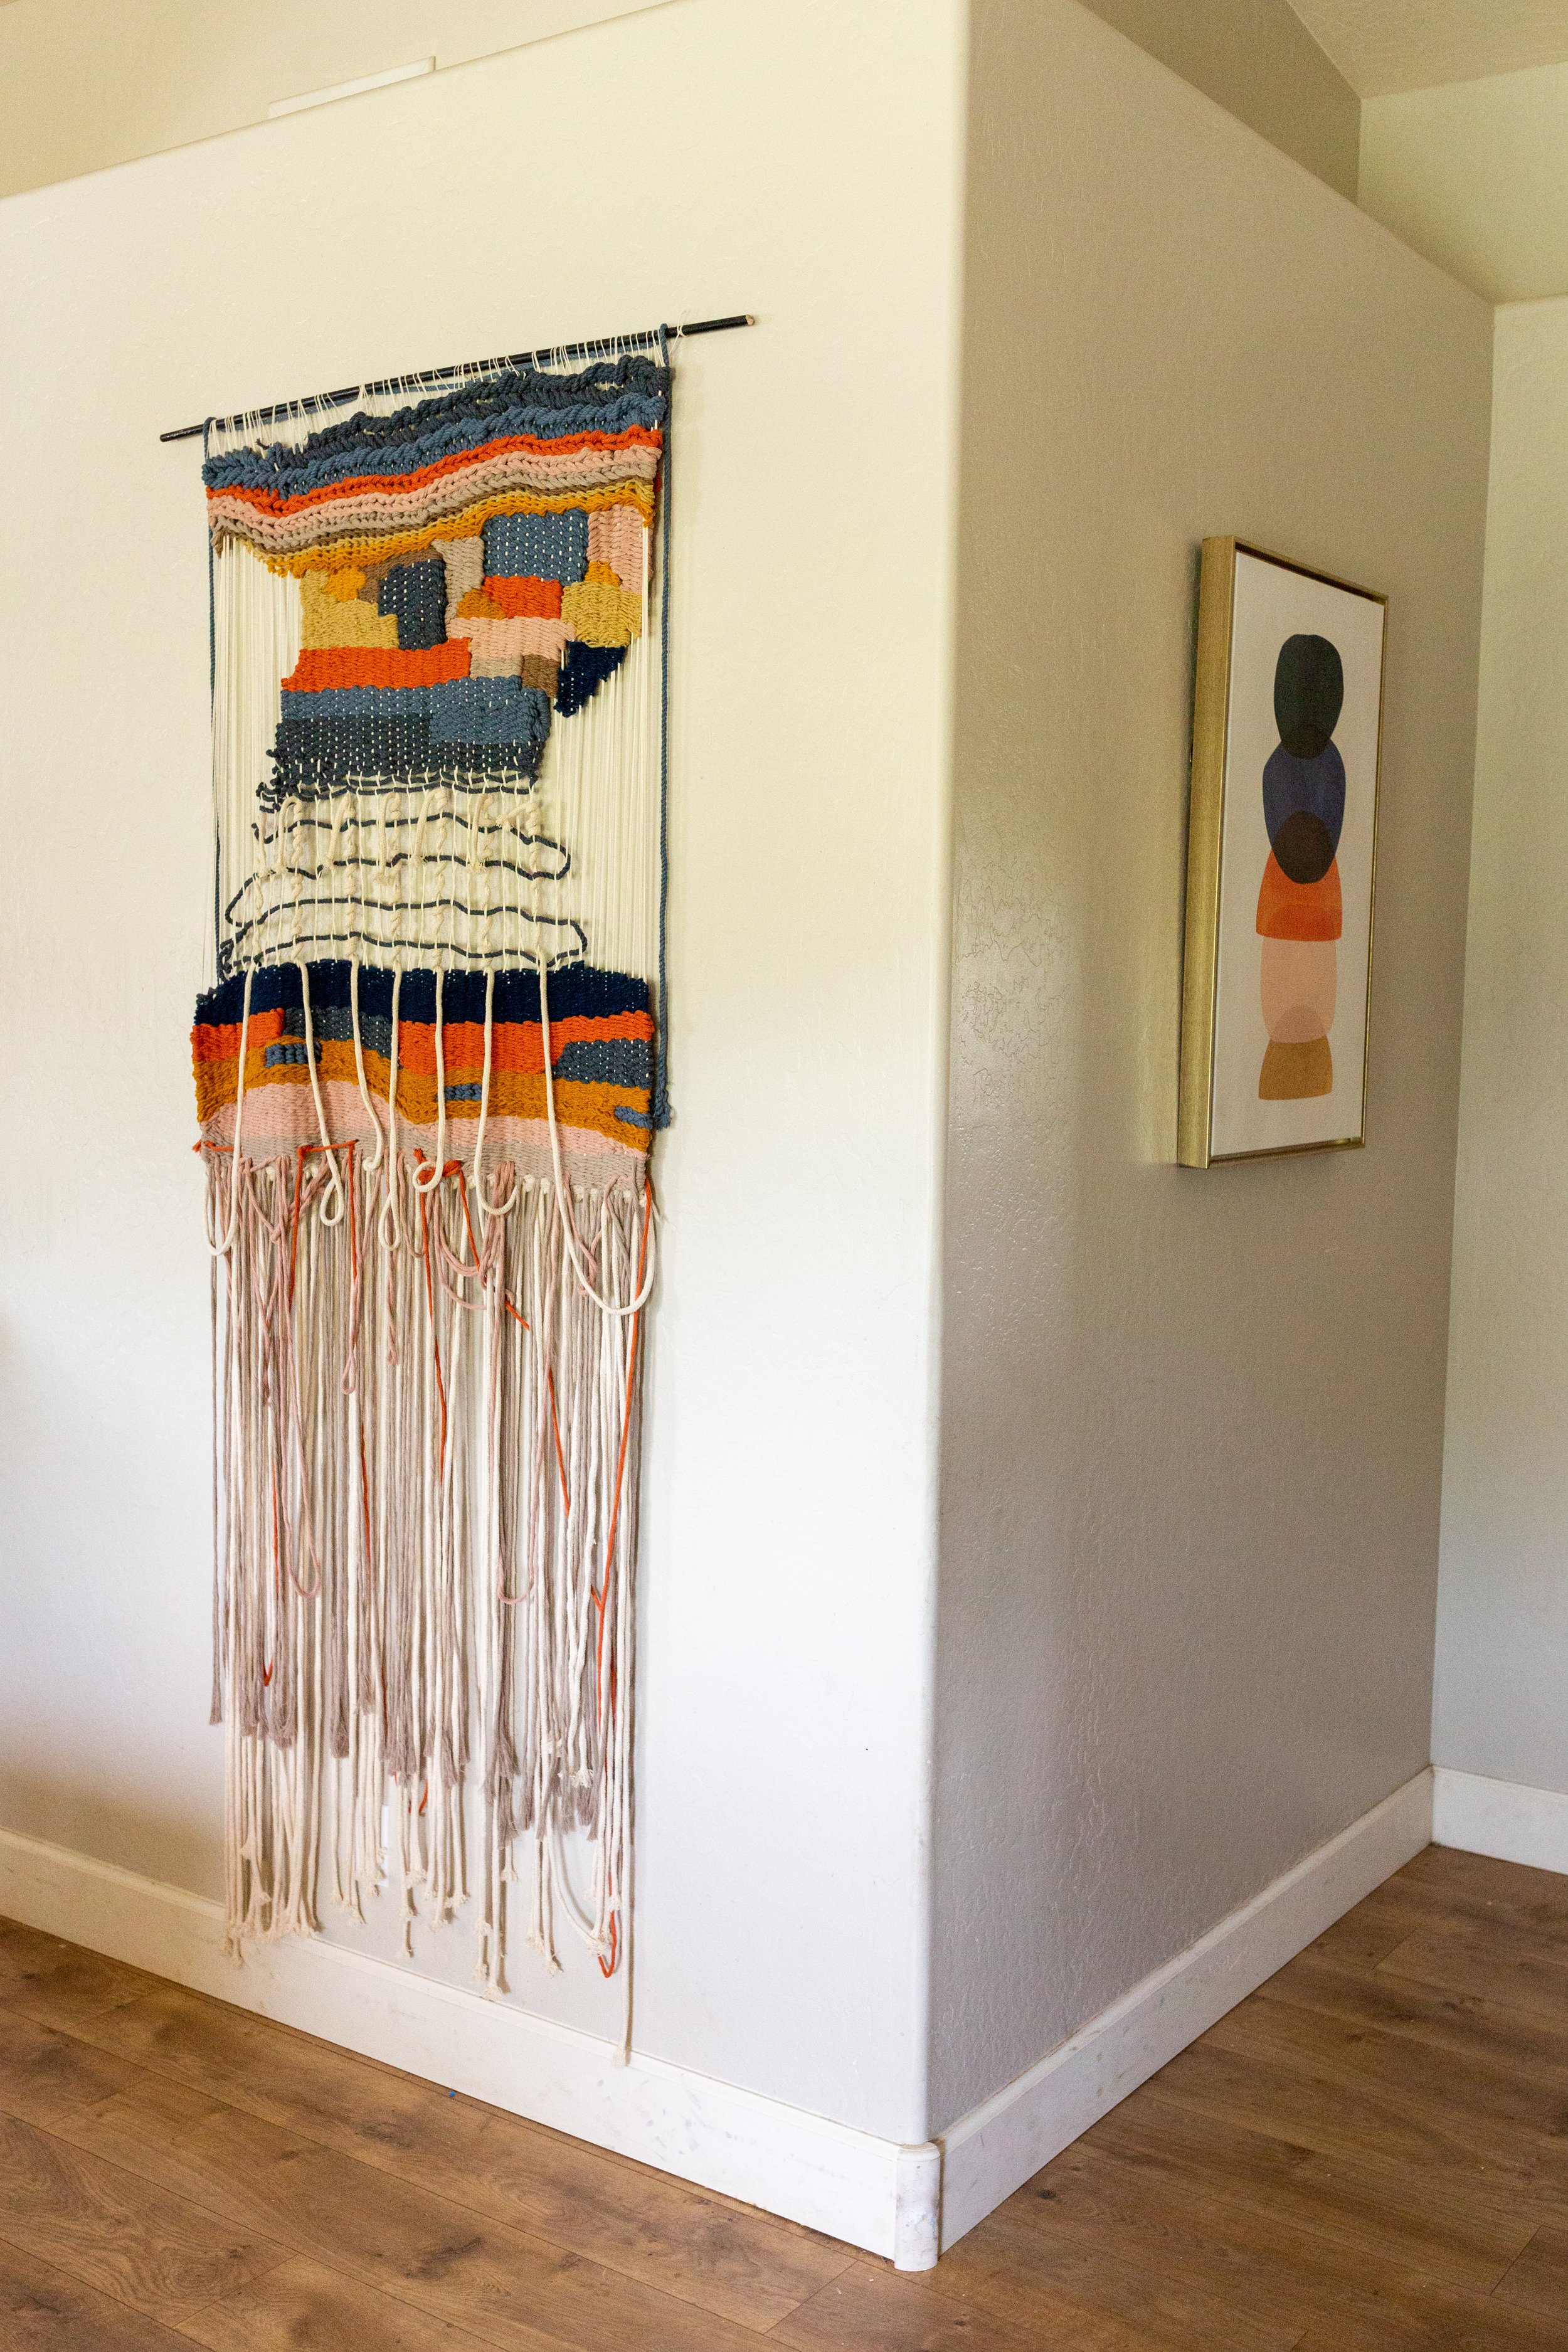 Sunsets by Stephanie Eche in Private Home